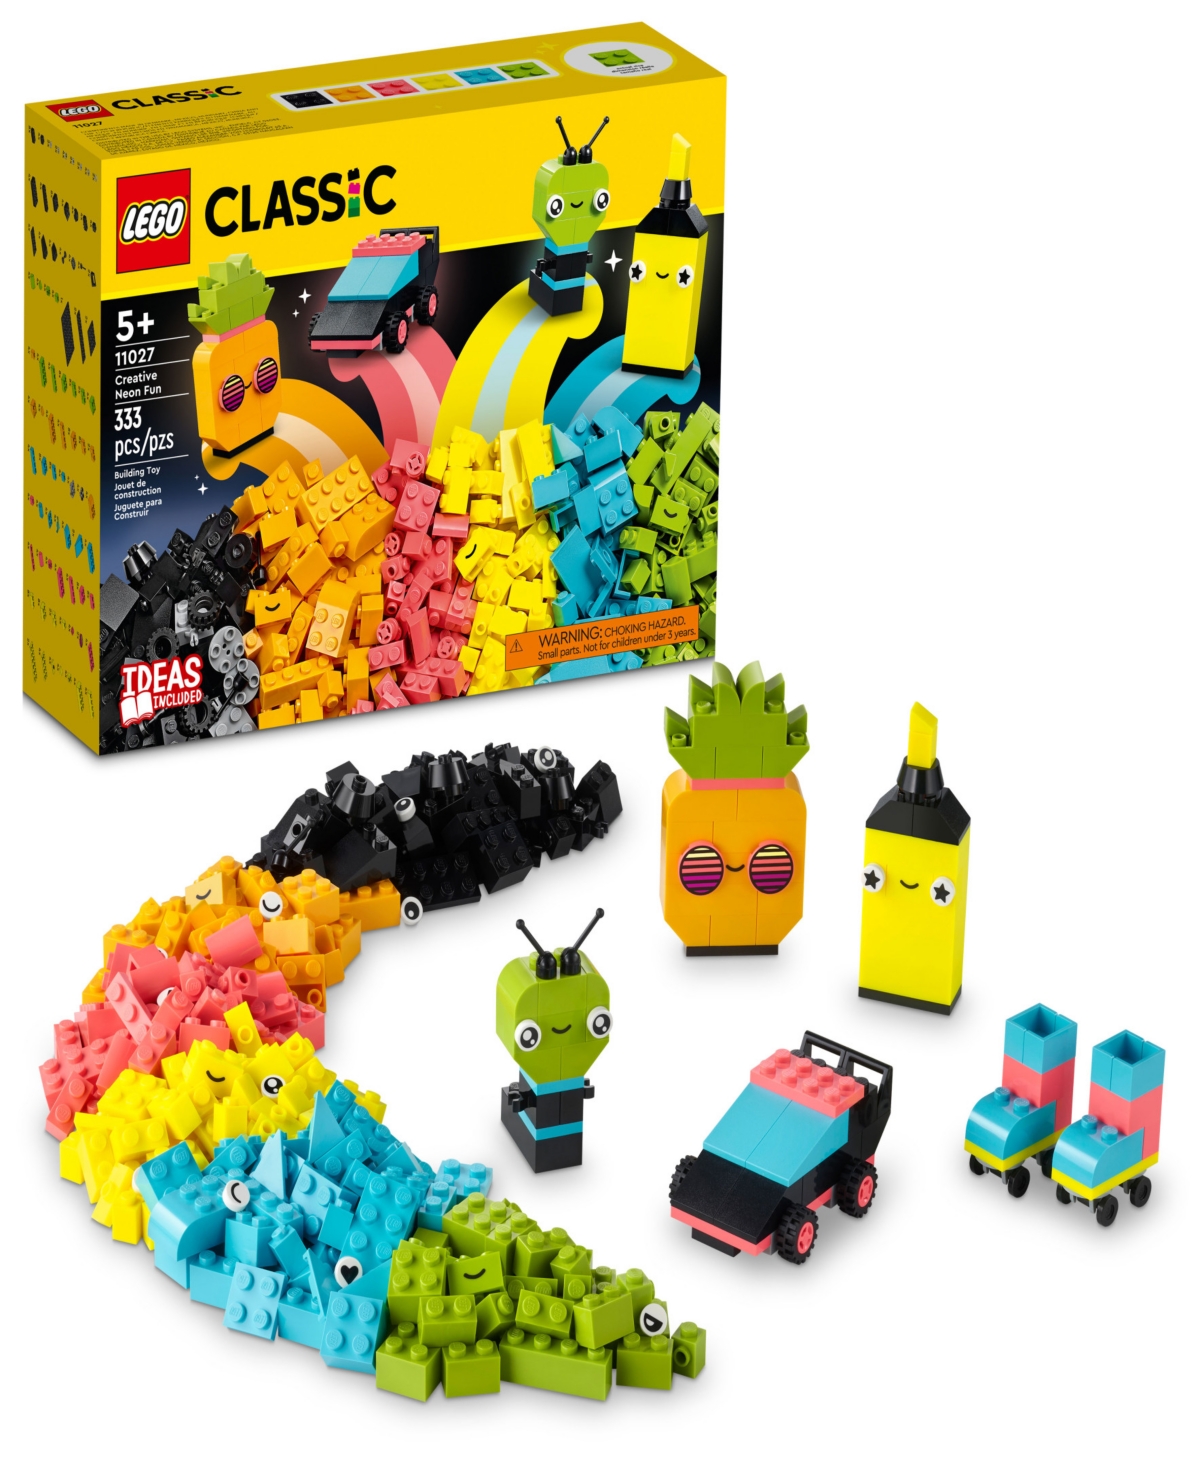 Lego Classic 11027 Creative Neon Fun Toy Assorted Piece Brick Expansion Building Set In Multicolor